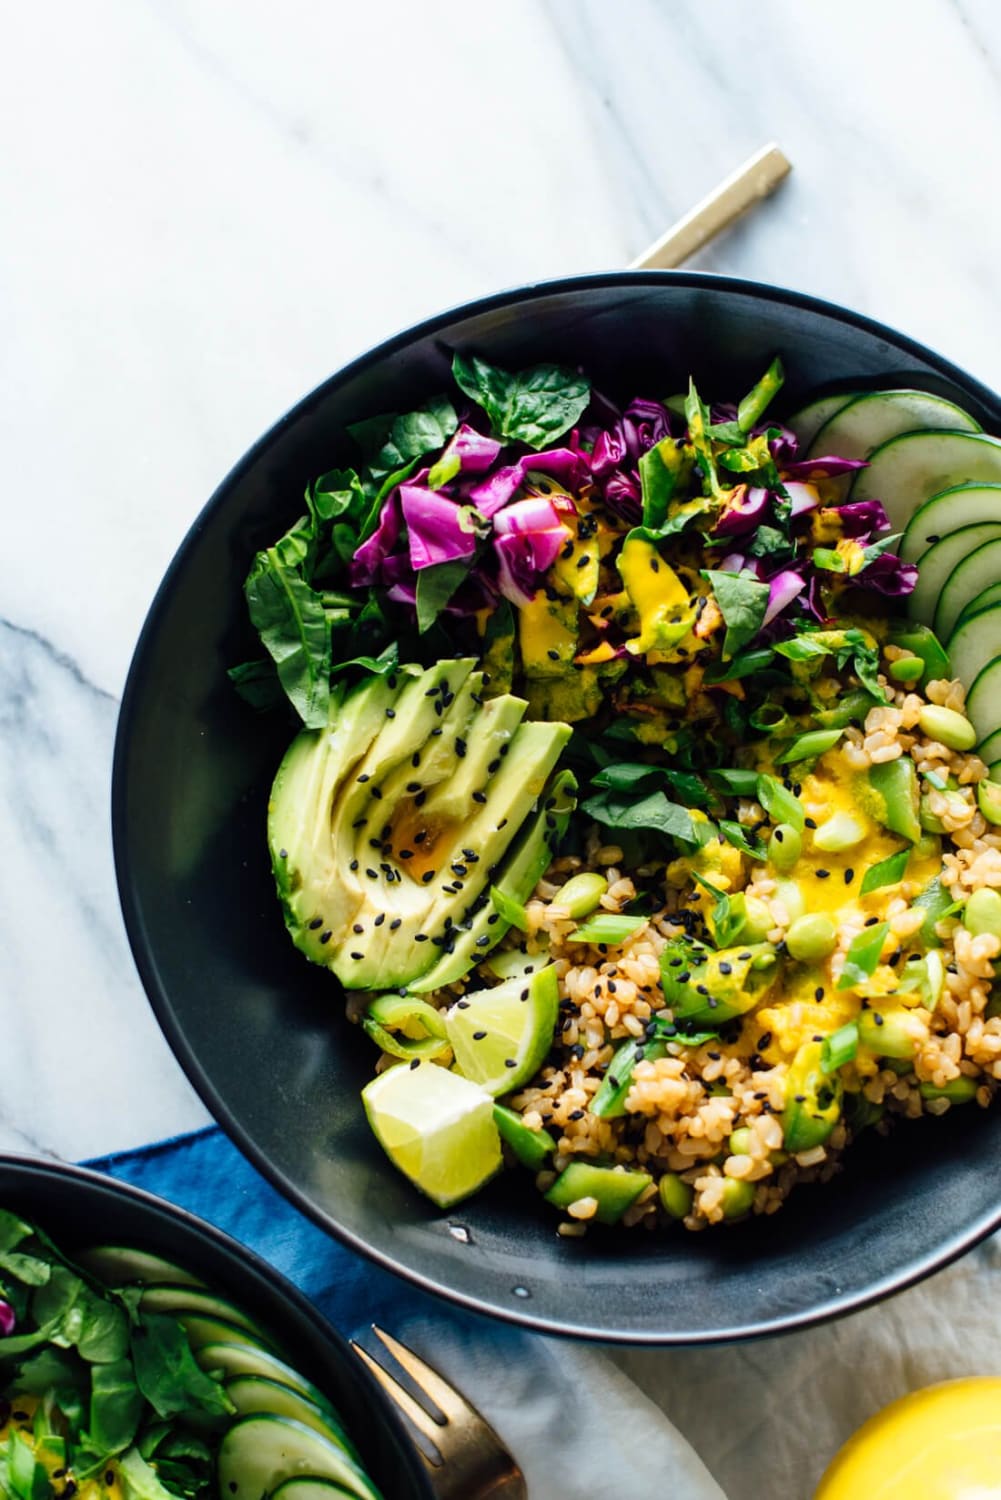 Build-Your-Own Buddha Bowl